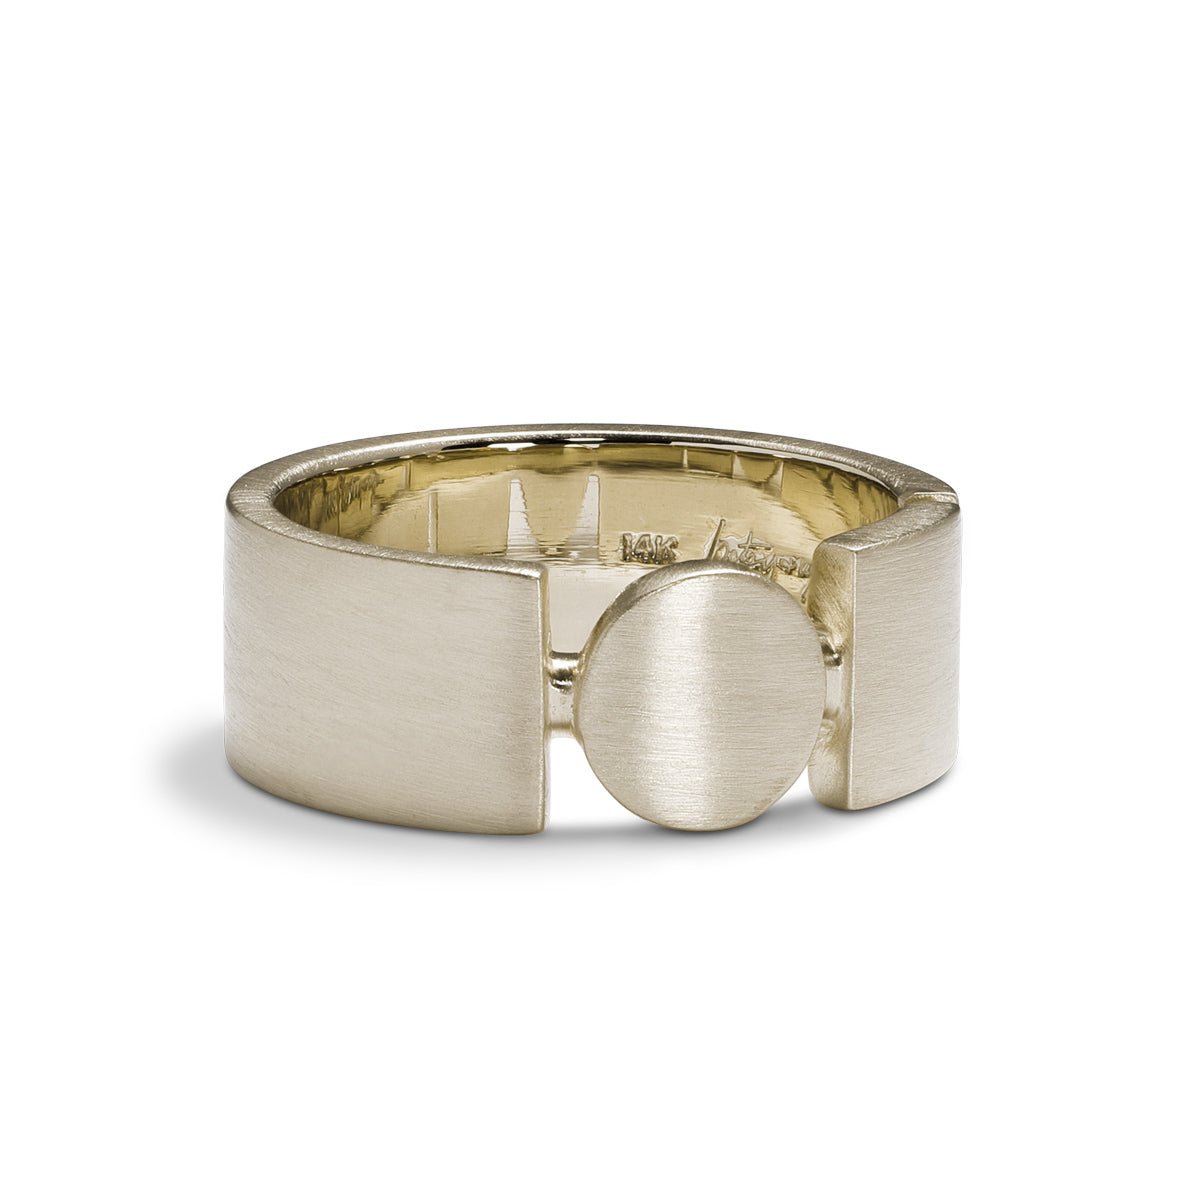 Square and circle motif Forma band. Made with 14K recycled white gold in Portland, Oregon.